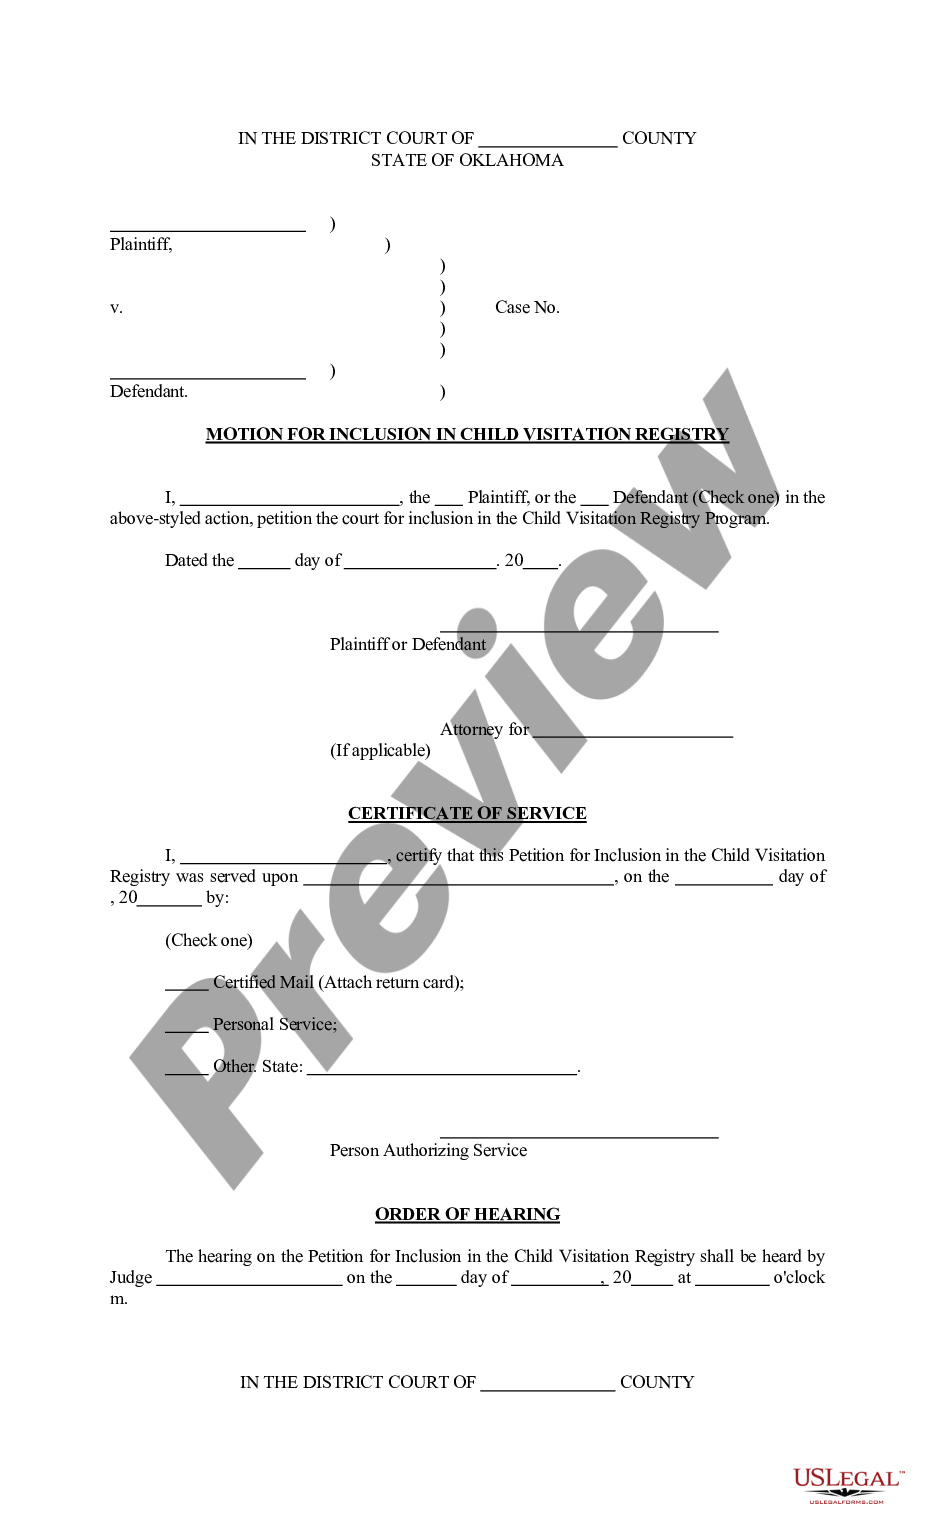 page 0 Motion For Inclusion In Child Visitation Registry - Child Visitation Registry Order preview